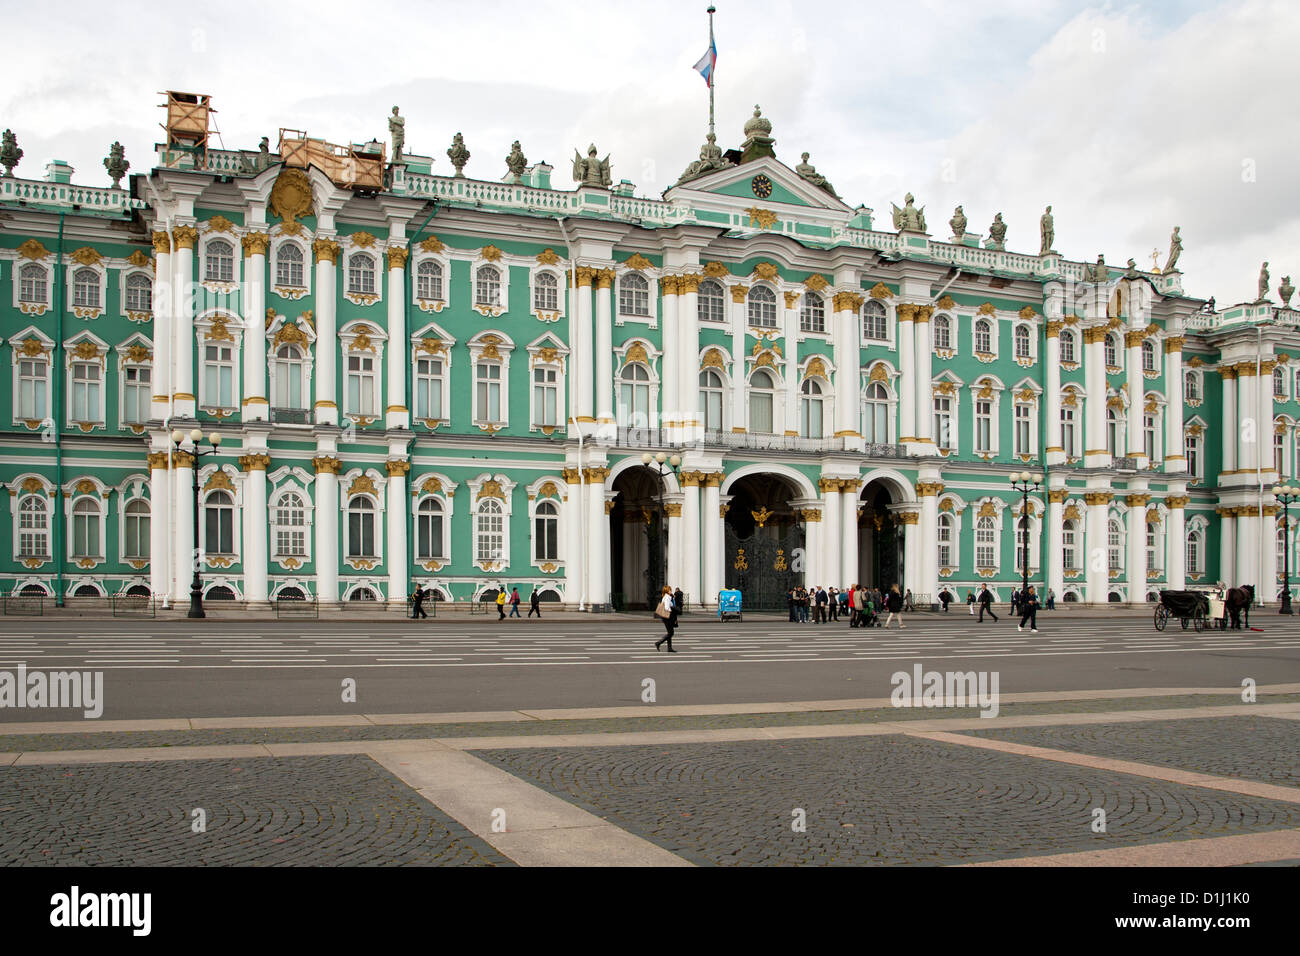 The State Hermitage Museum in Saint Petersburg, Russia. Stock Photo